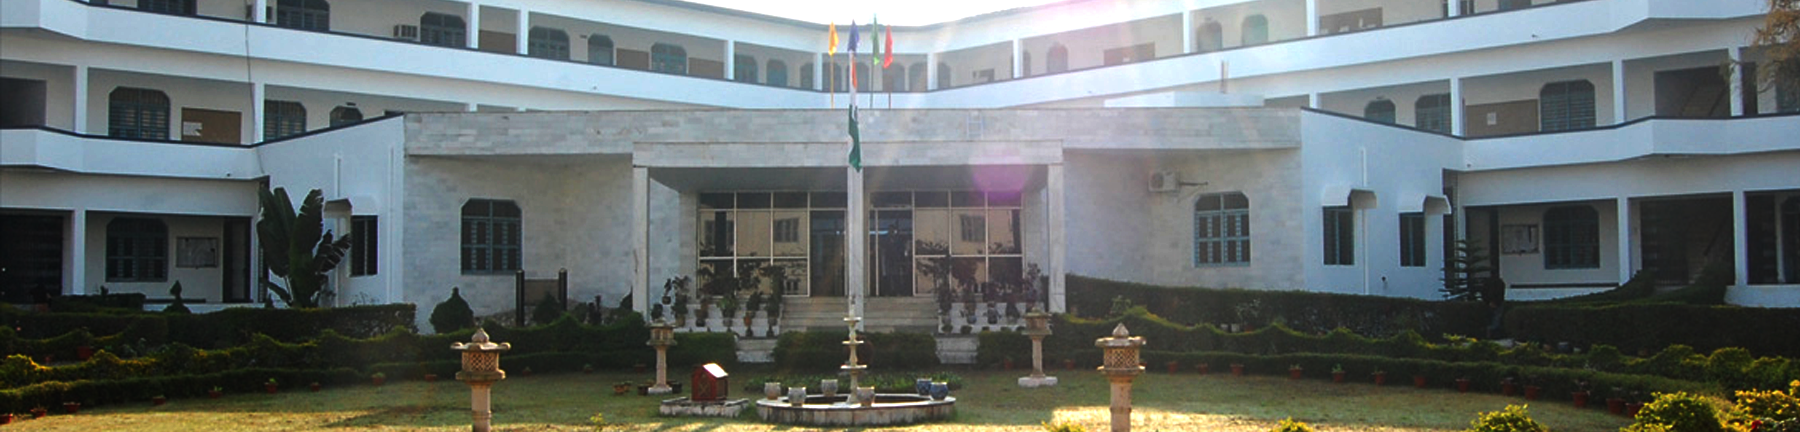 Amrapali Institute of Management and Computer Applications, Haldwani